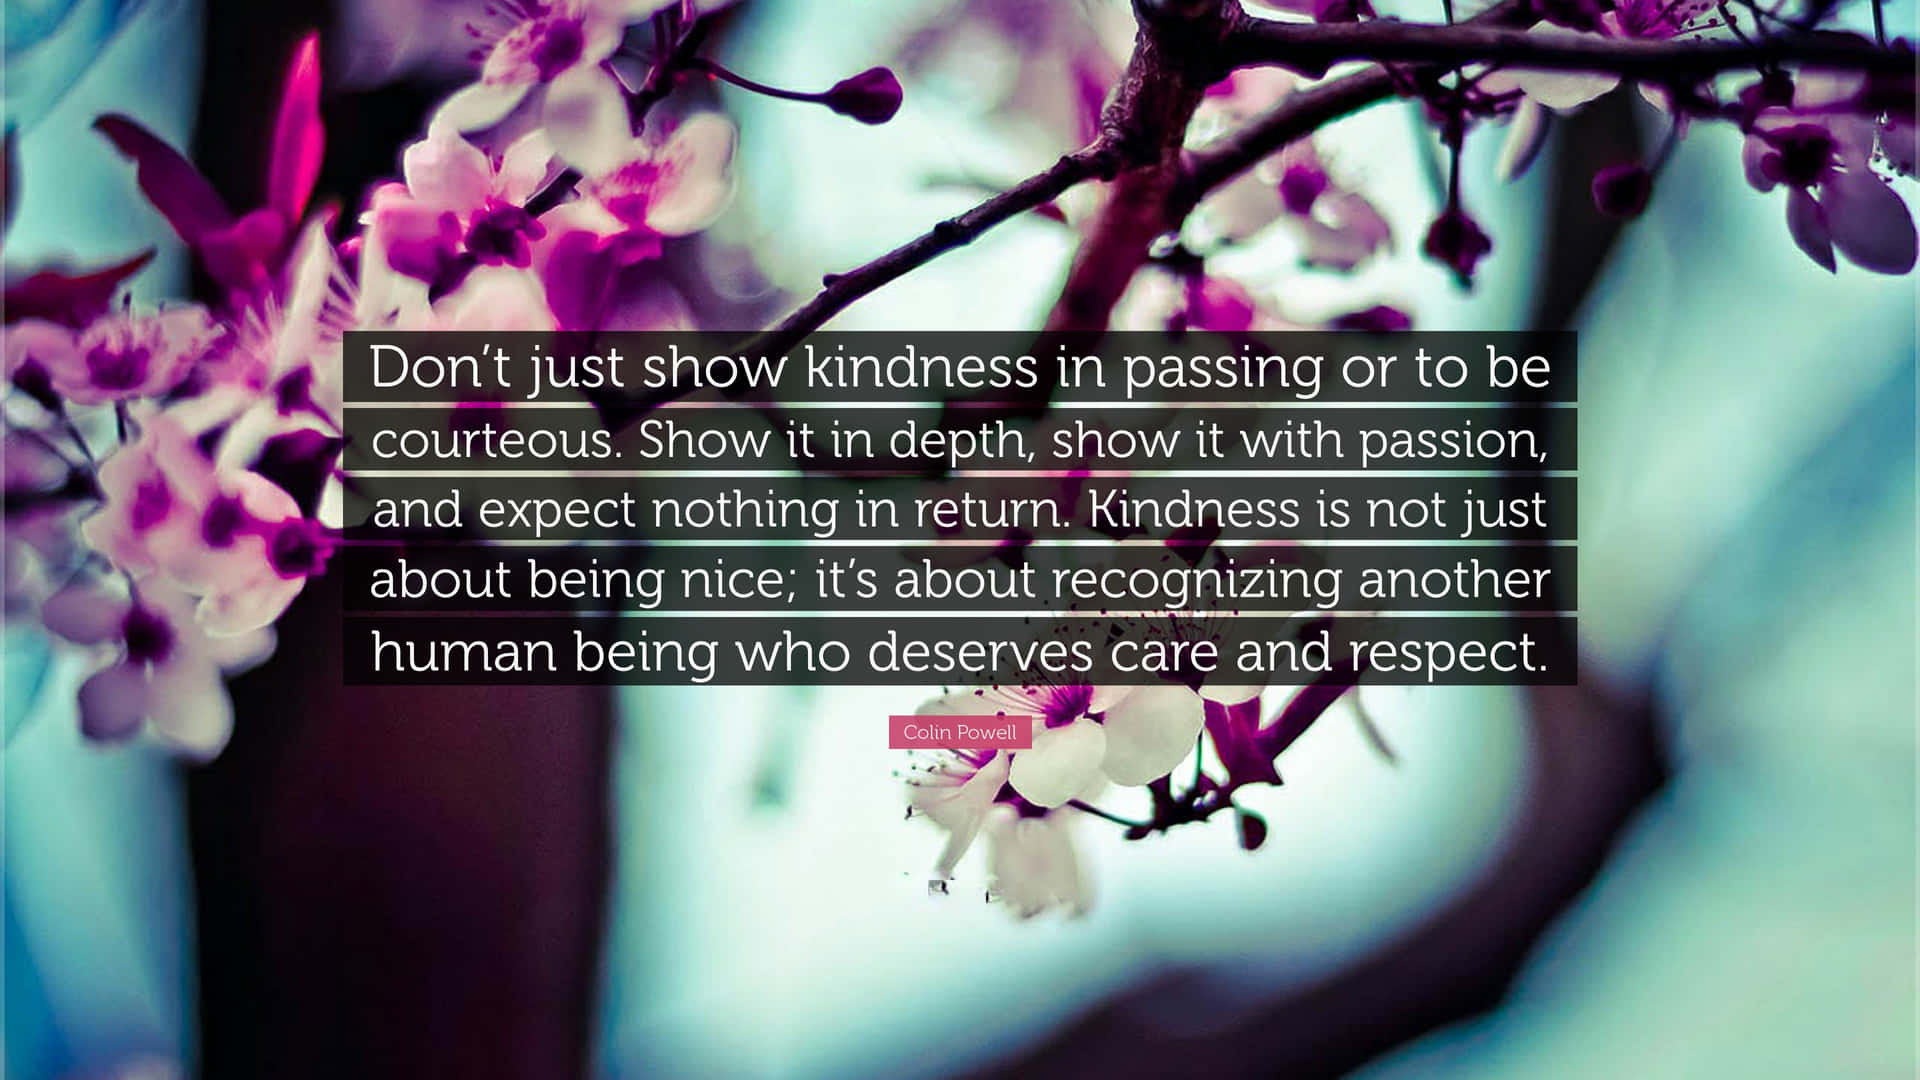 Show Kindness With Passion, Not In Passing Wallpaper